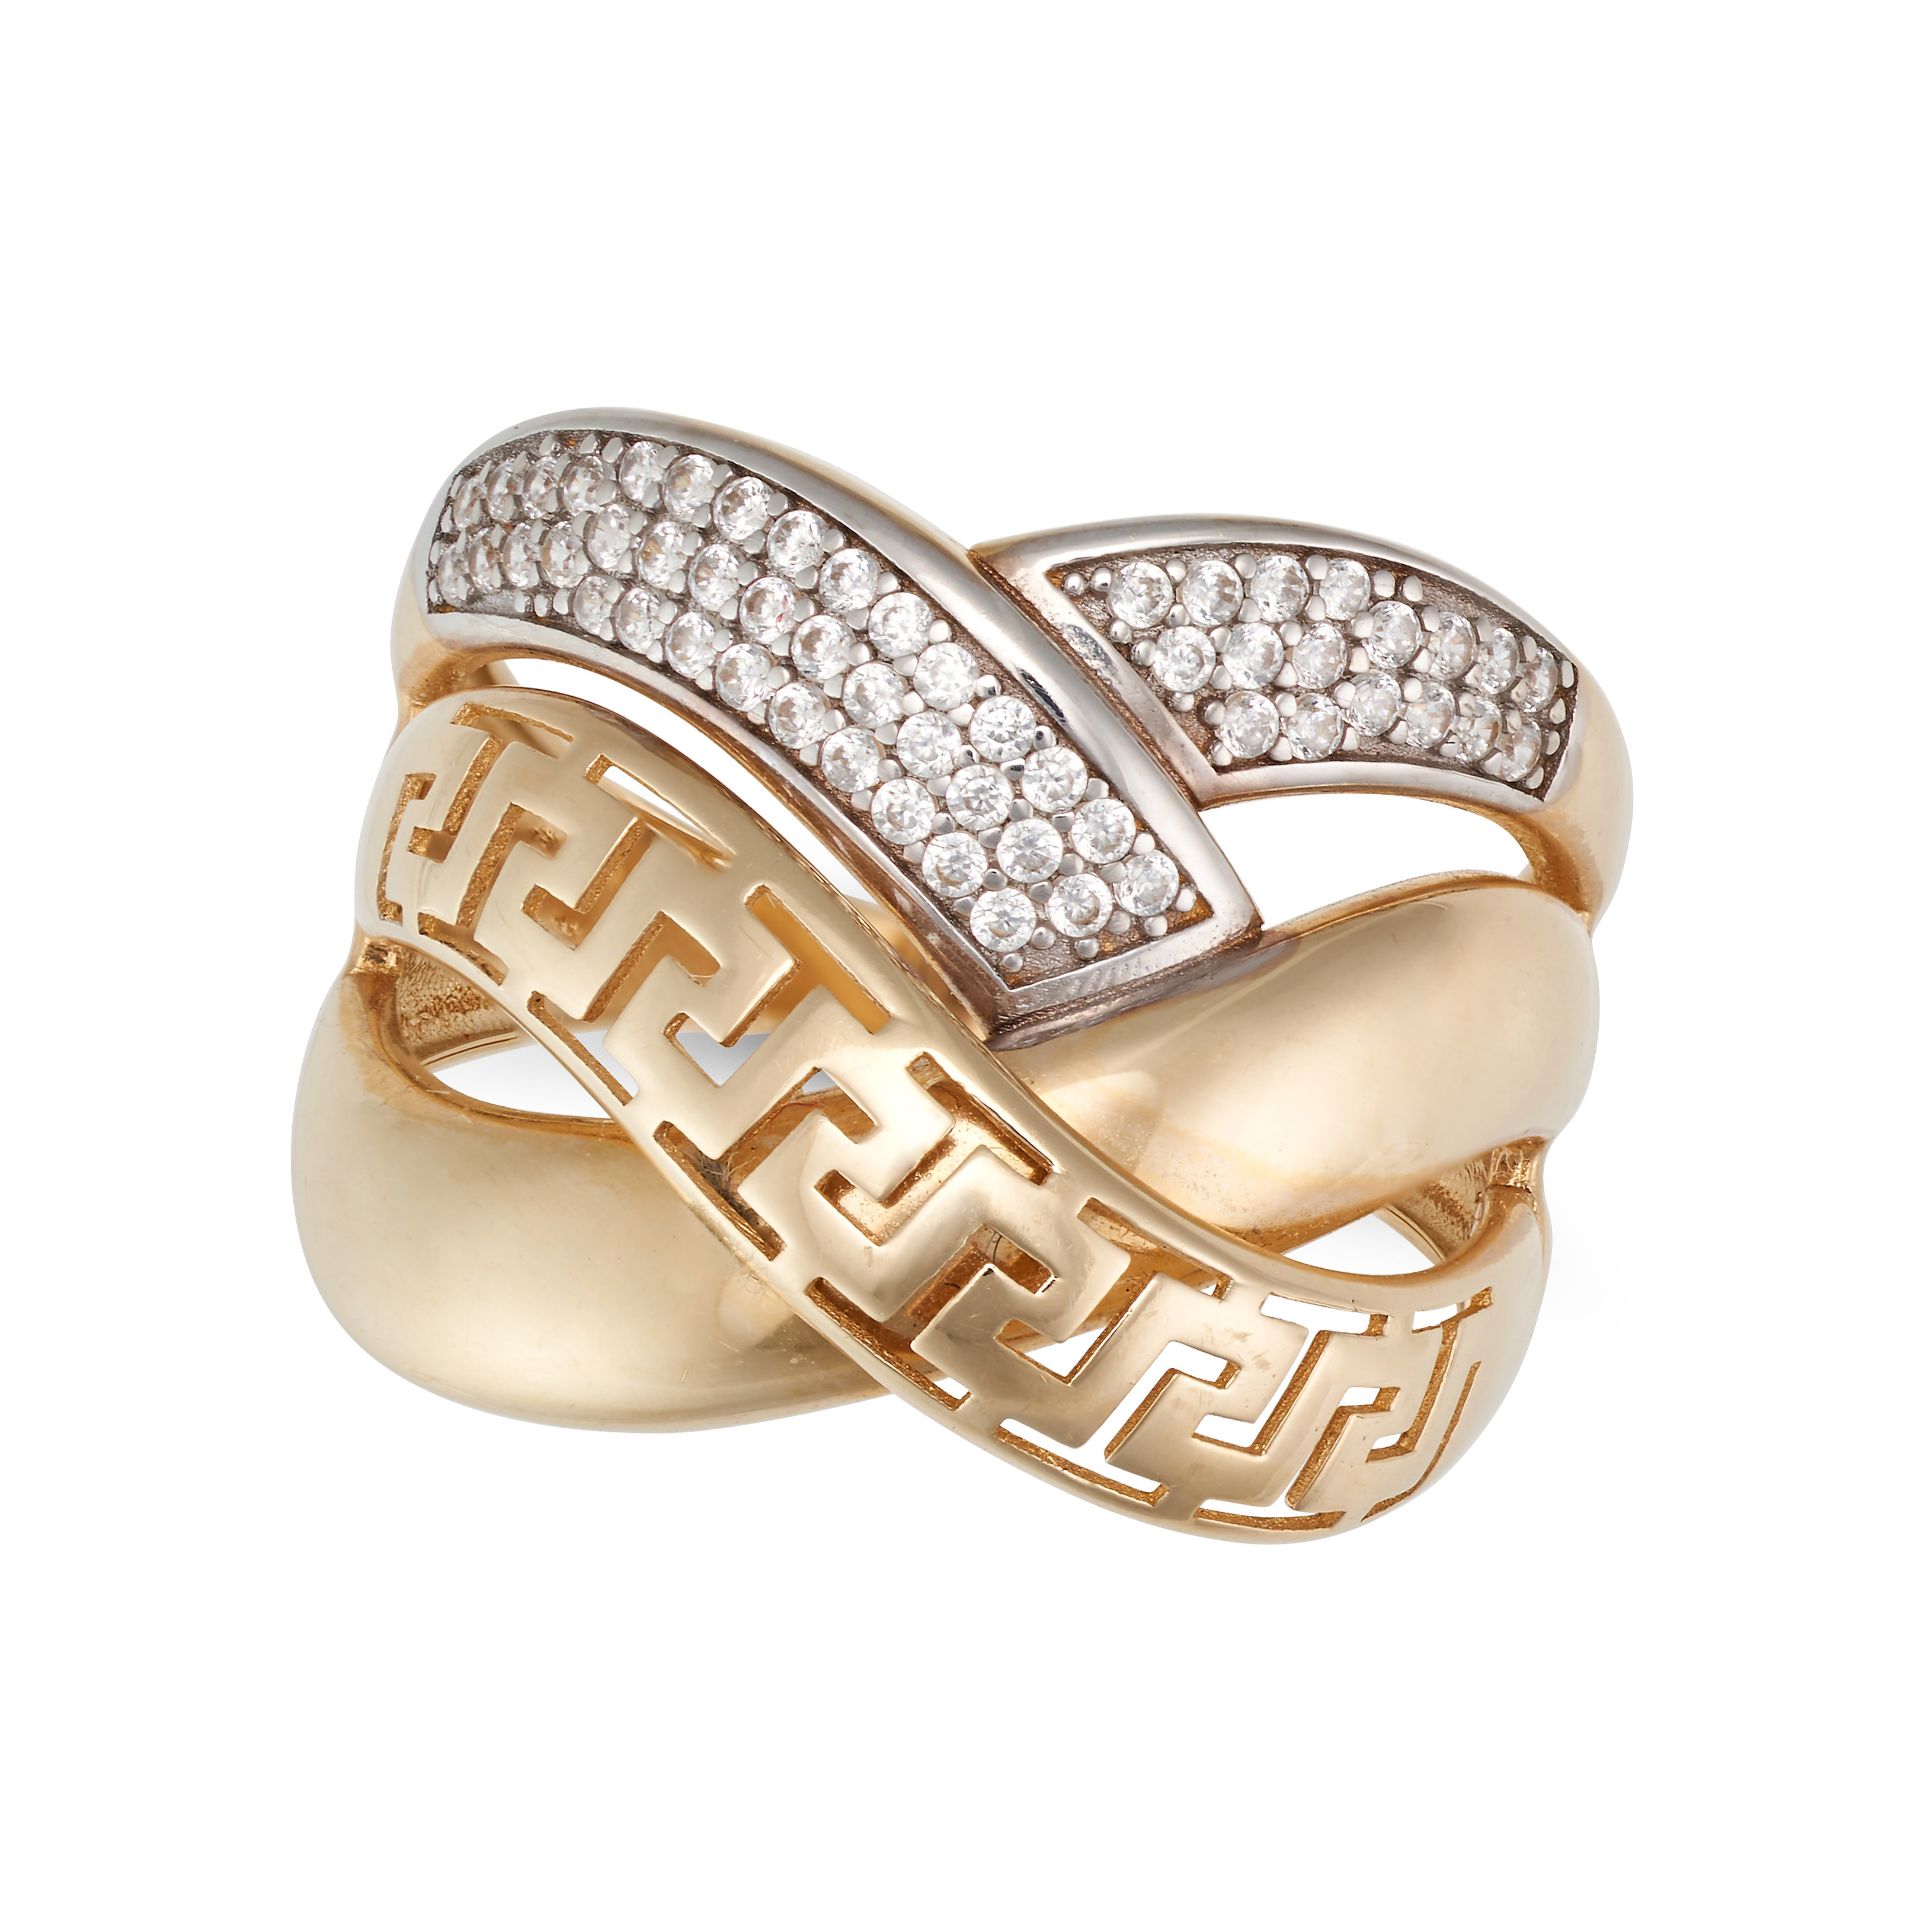 A DRESS RING in 14ct yellow gold, comprising four interlocking gold bands, two pave set with whit...